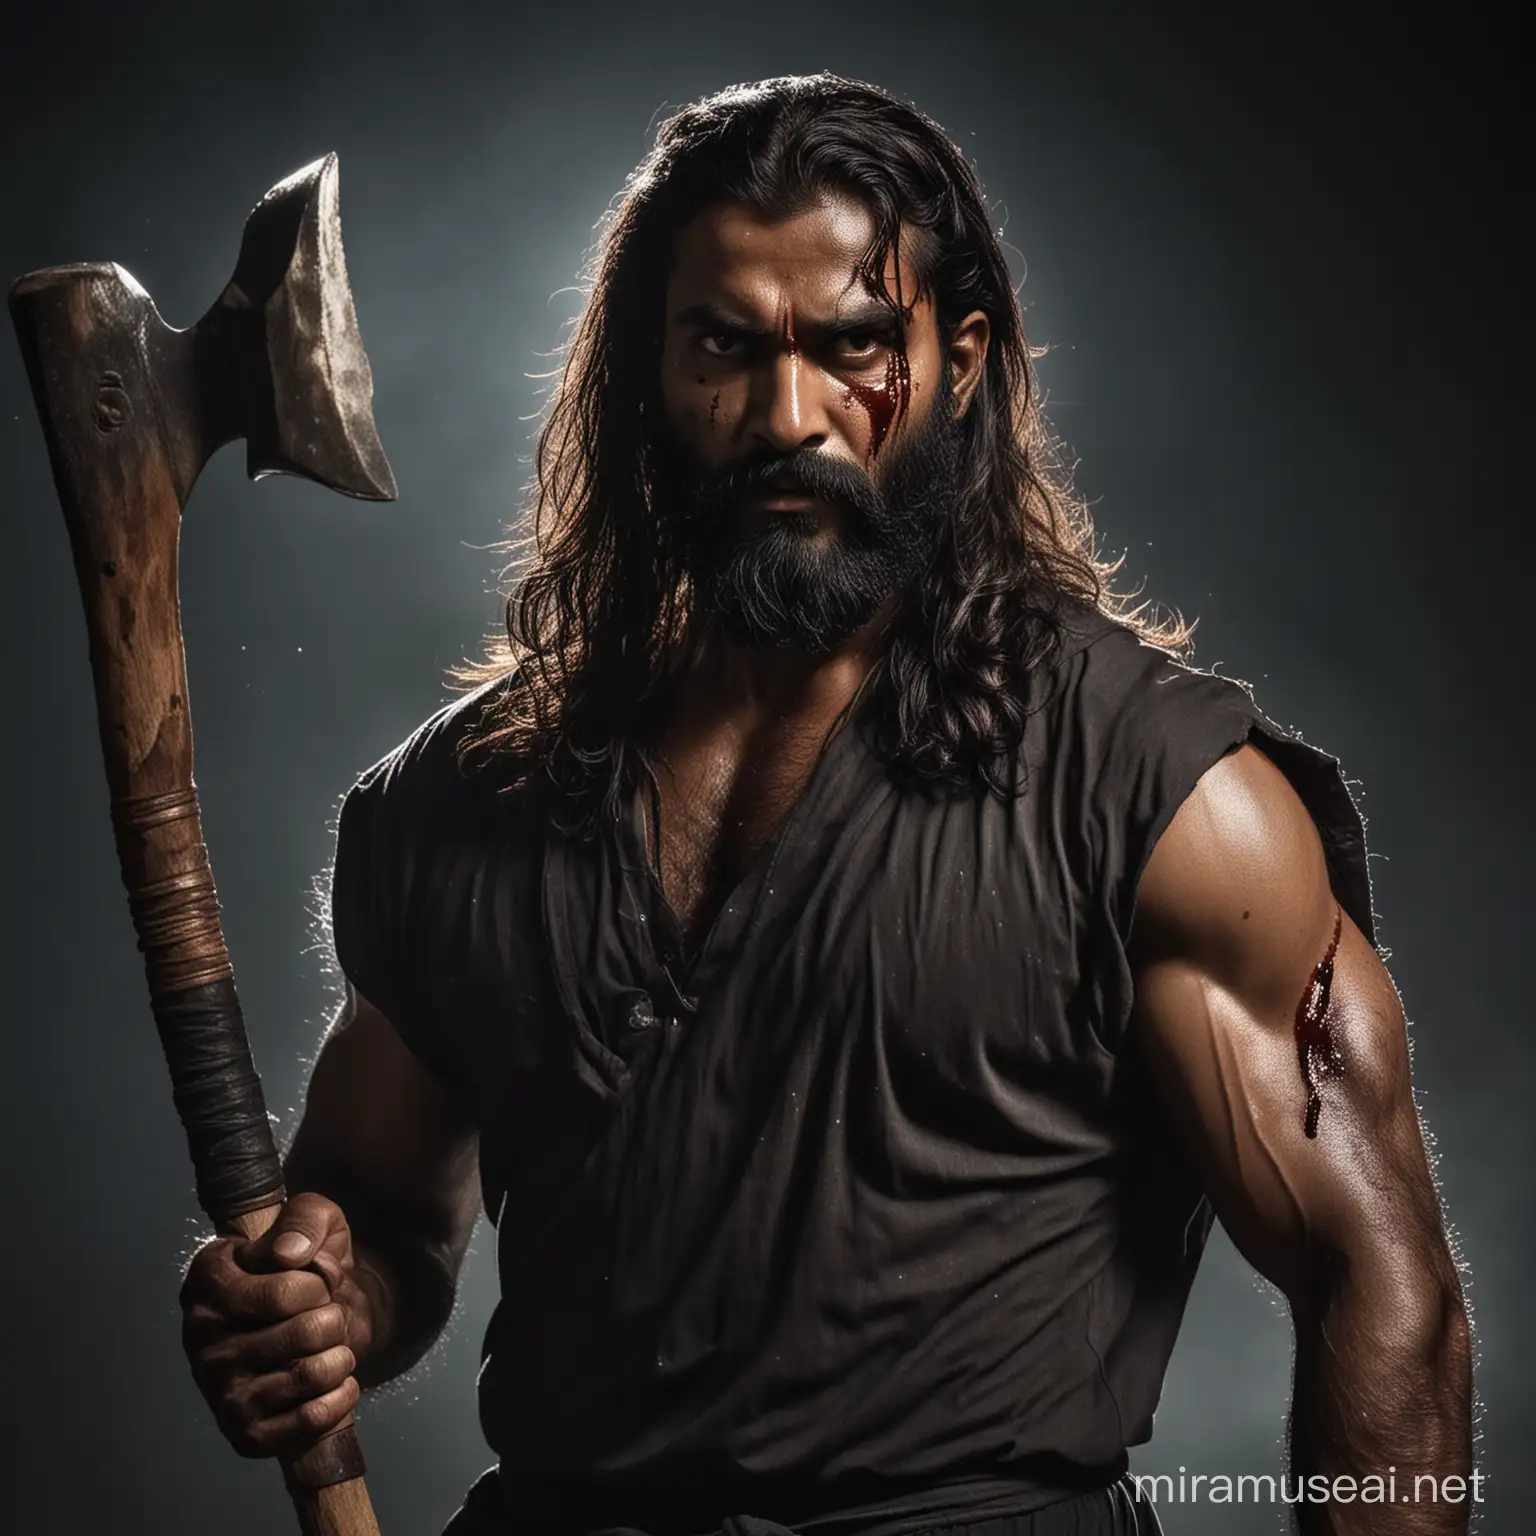 Profile of Modern day Parshuram in flowing beard and long hair and track suit with an axe slung across his shoulder, his eyes intense and blood shot his face partly lit by the moonlight

 